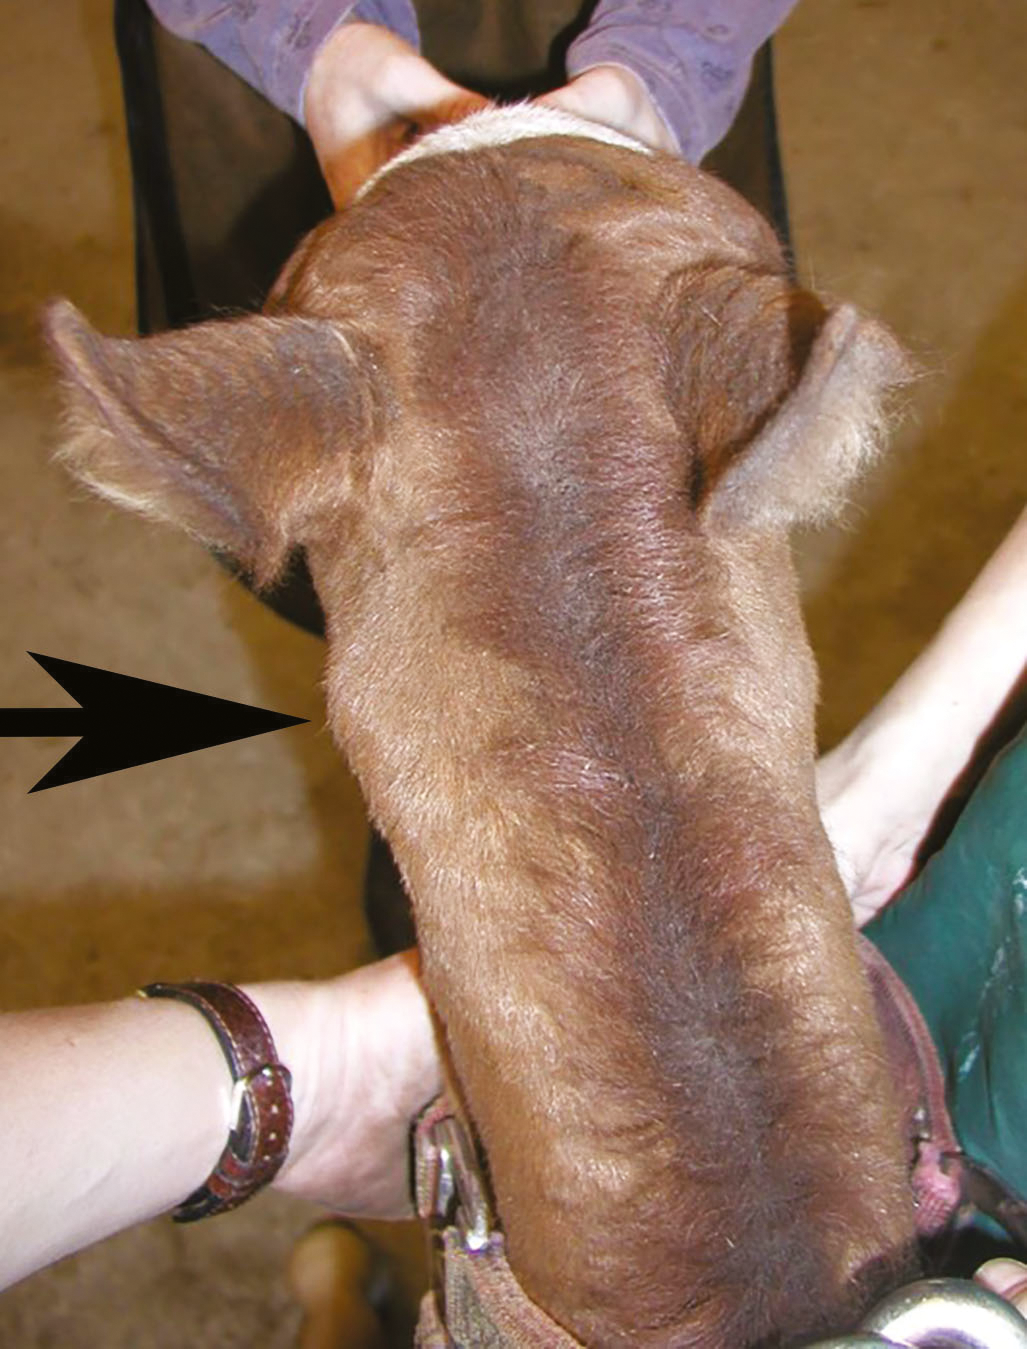 Dorsal view of malformation of cervical spine in Arabian filly with OAAM (arrow indicates region of malformation). Bordari et al., 2017